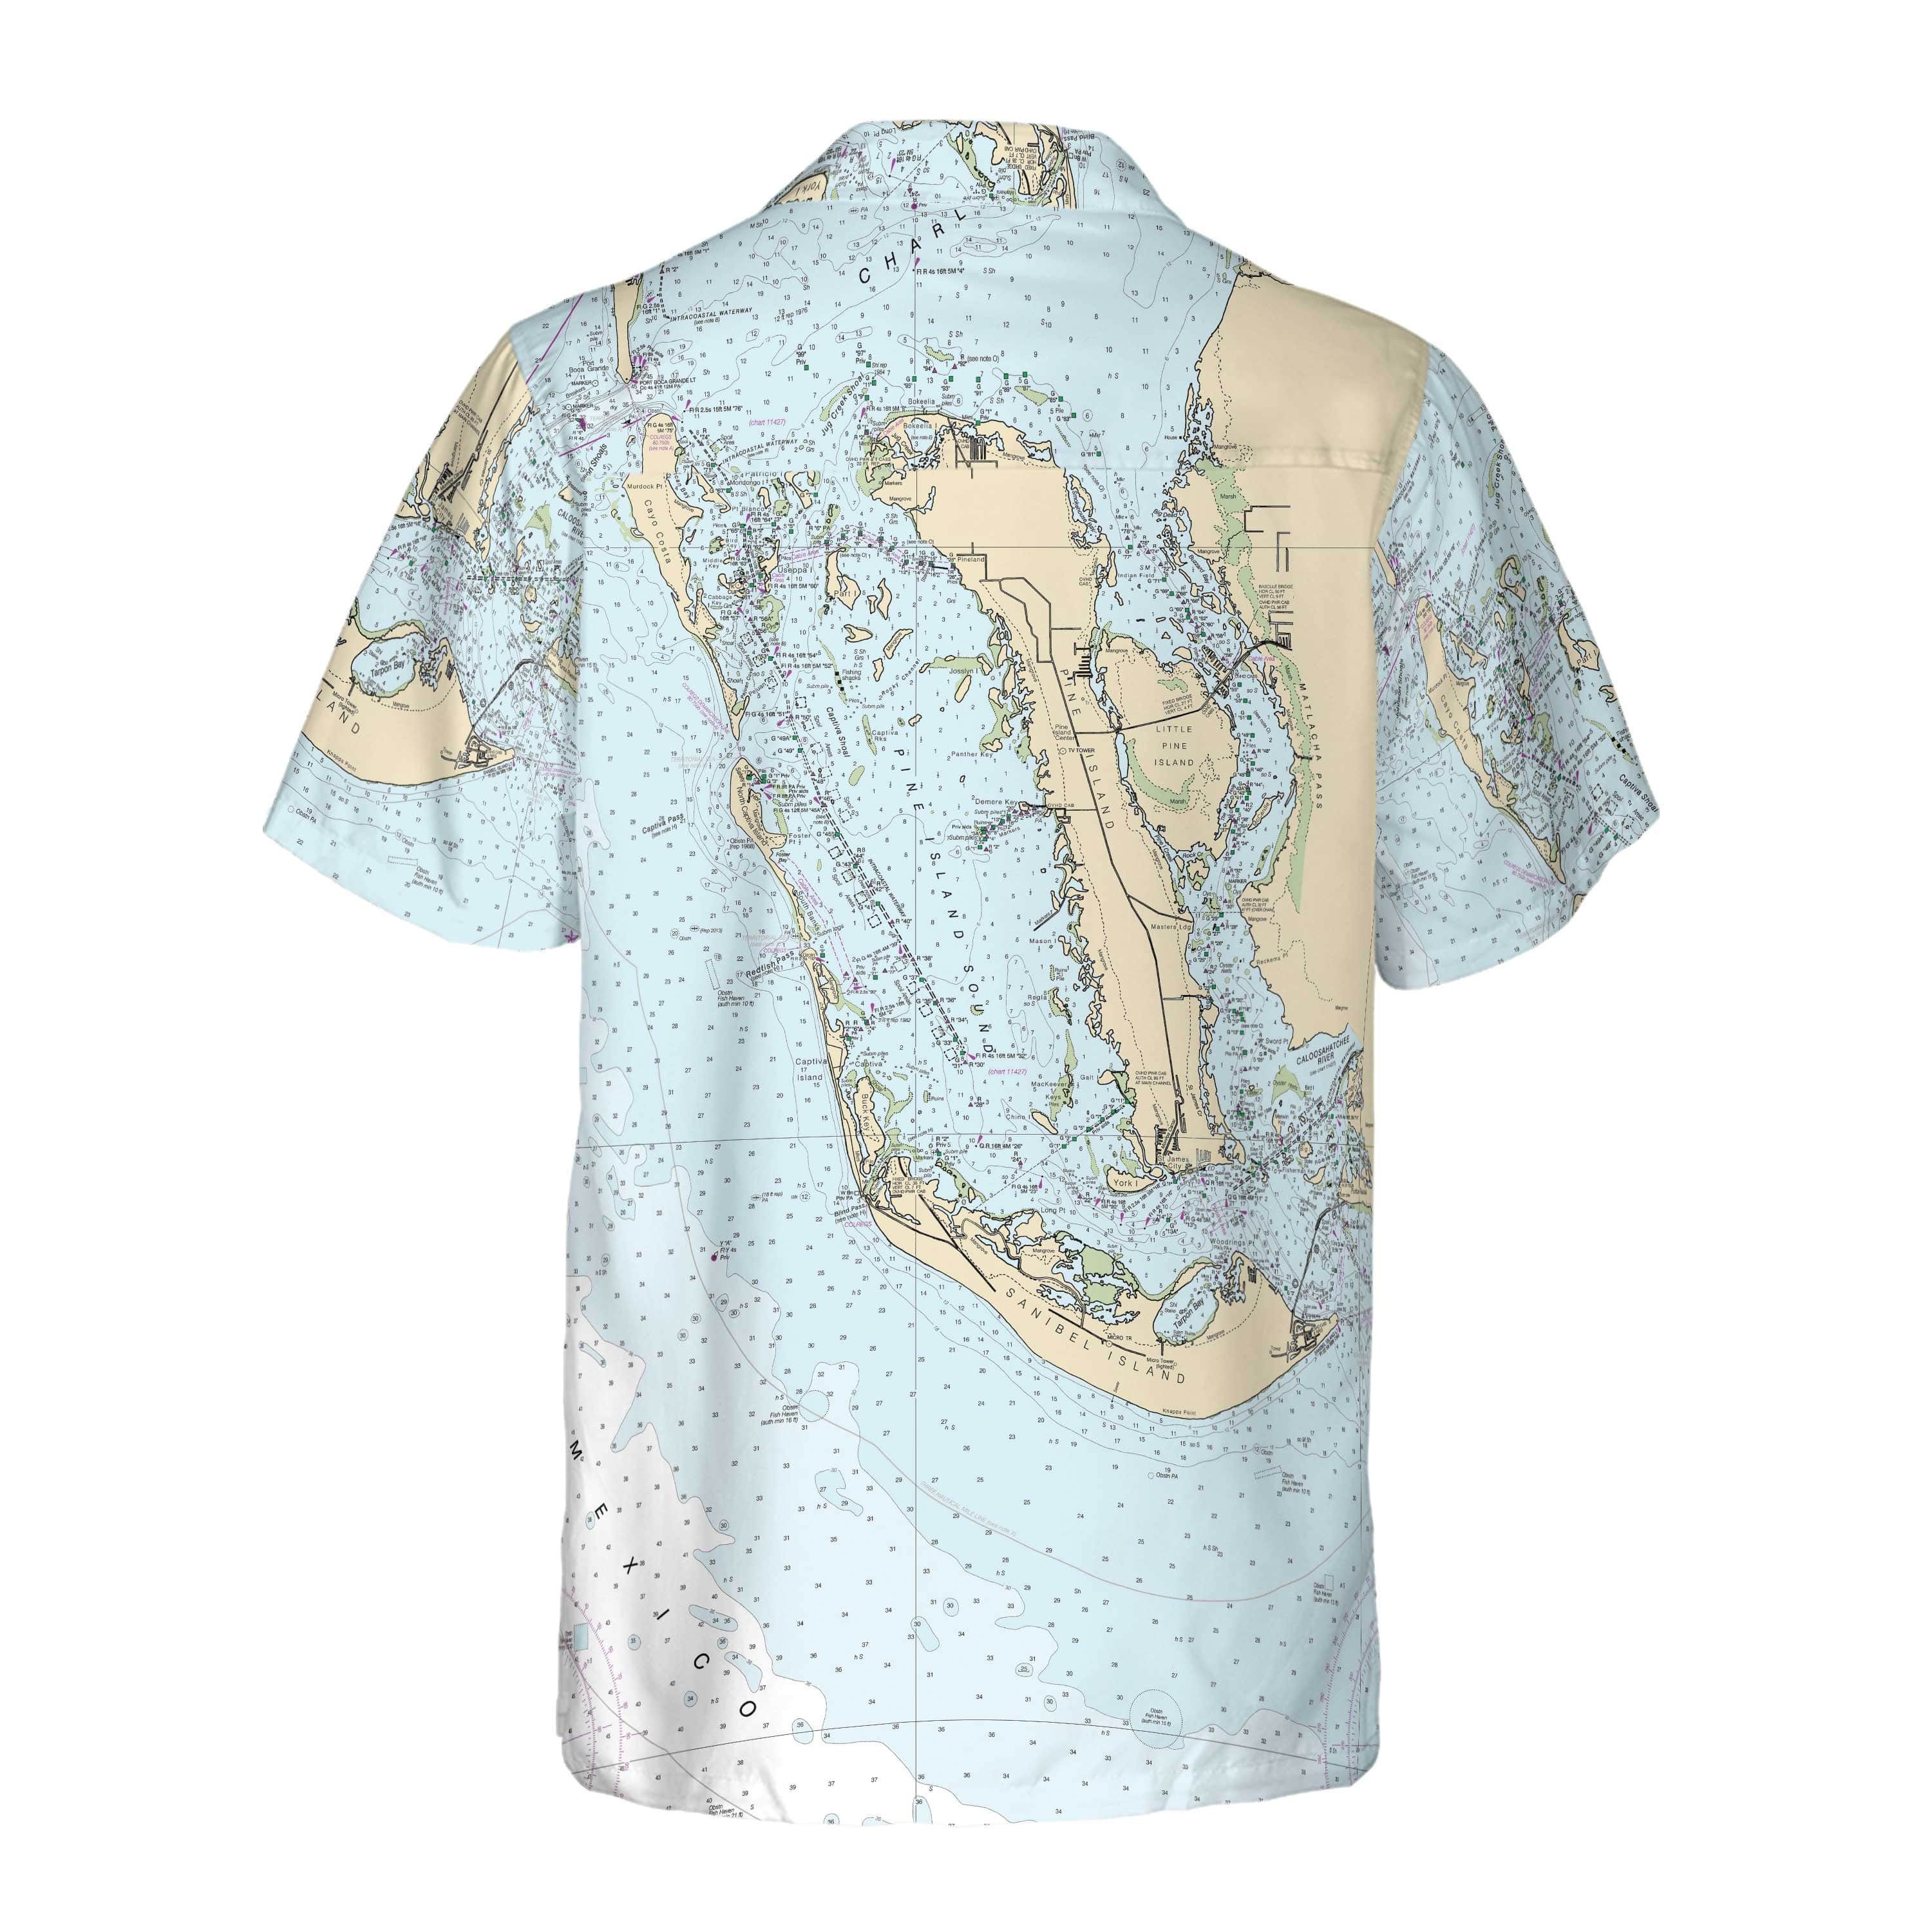 The Sanibel and Pine Island Sound Coconut Button Camp Shirt